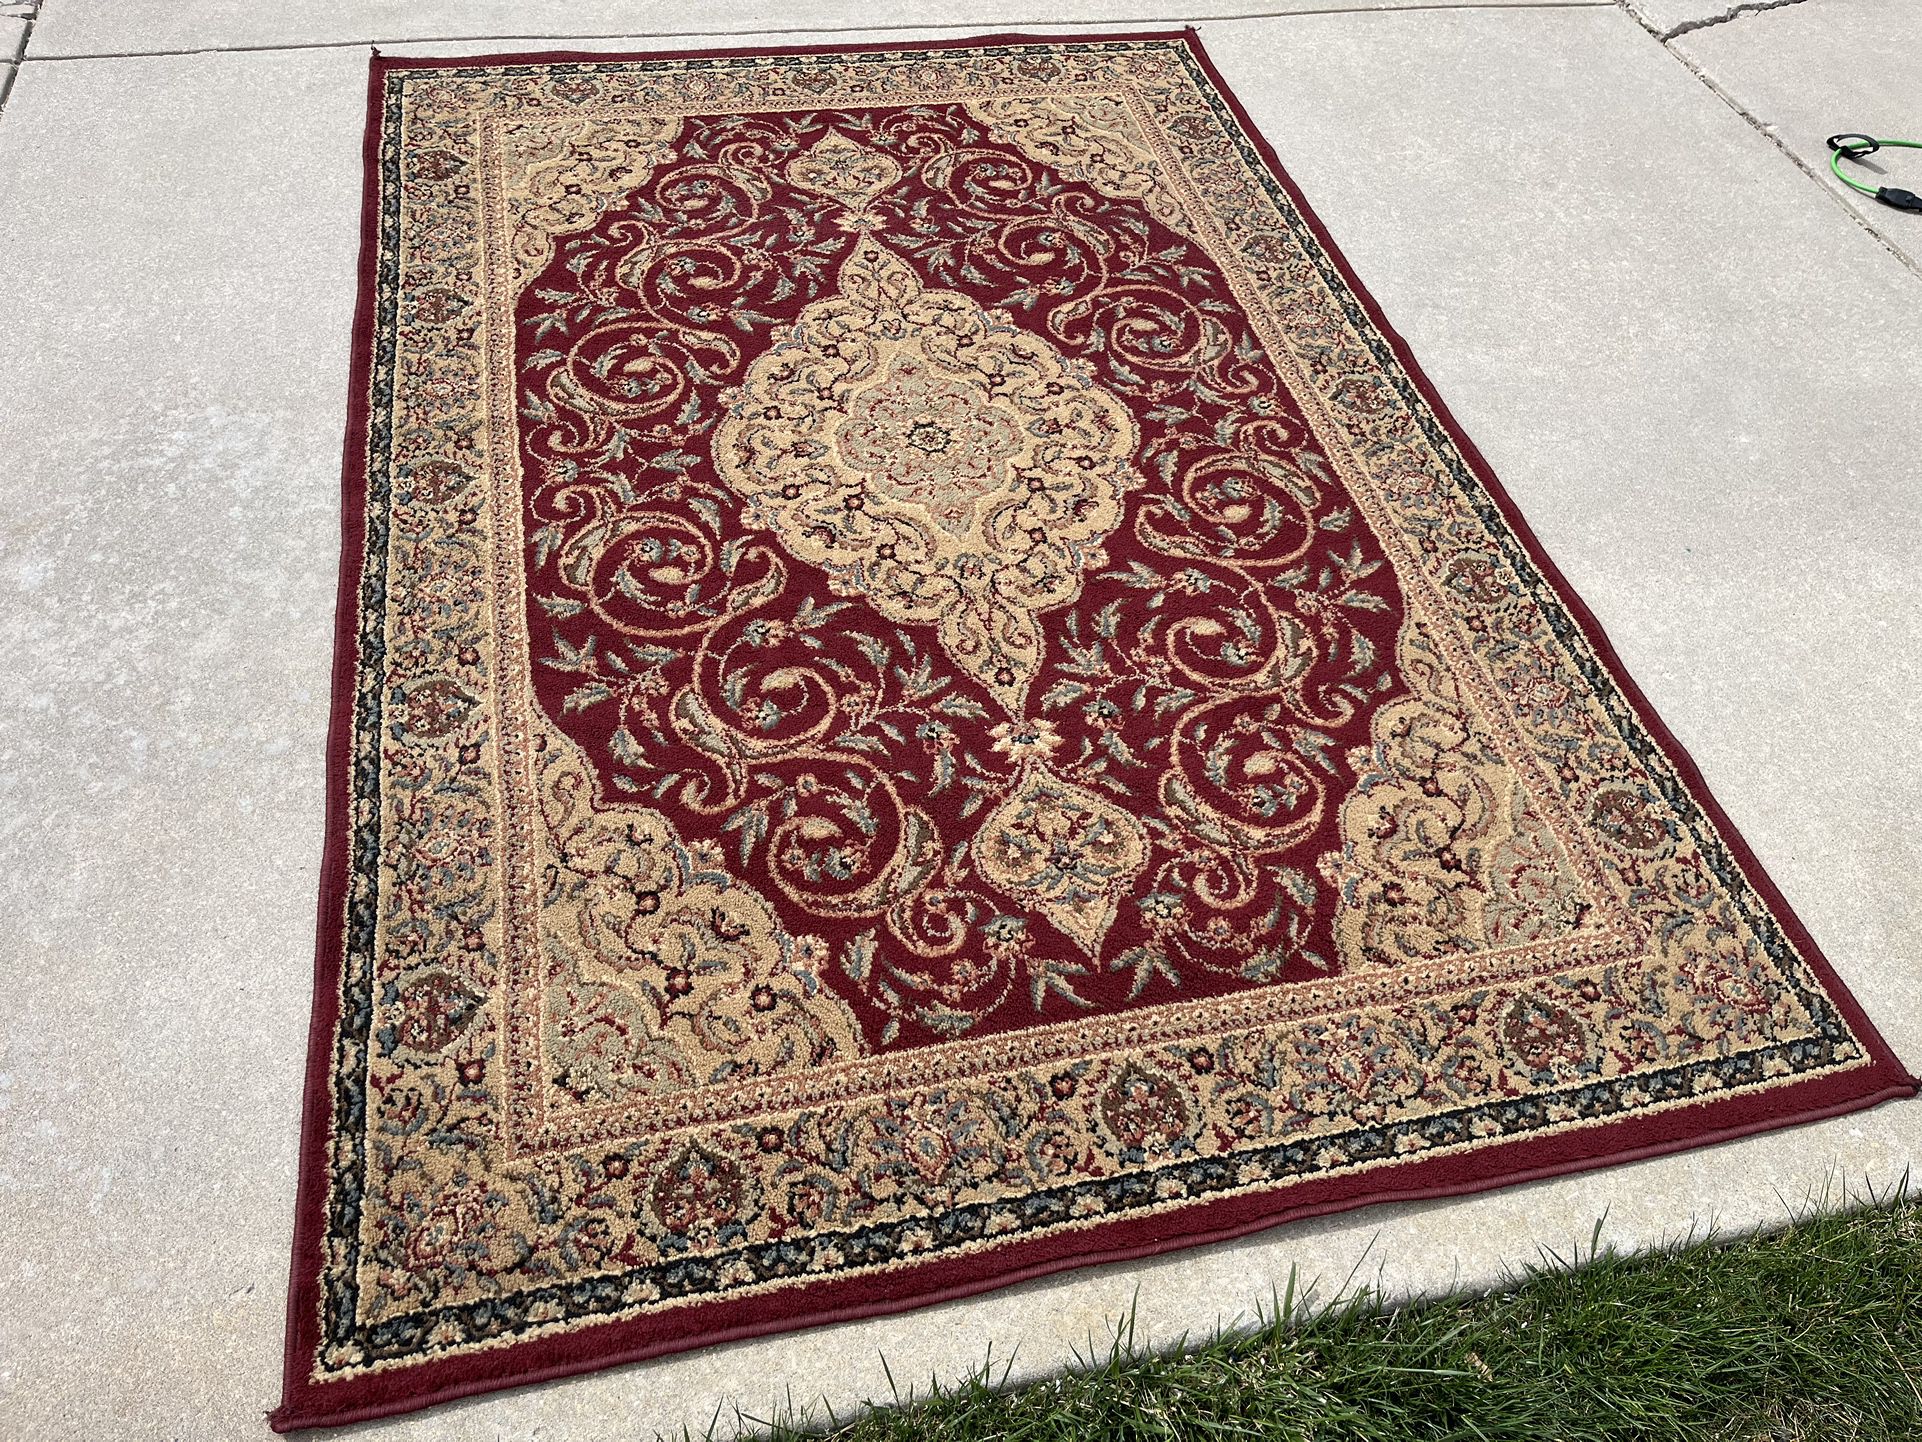 Lovely Gold and Red Vintage Oriental Style Area Rug (5’2”x7’10”)